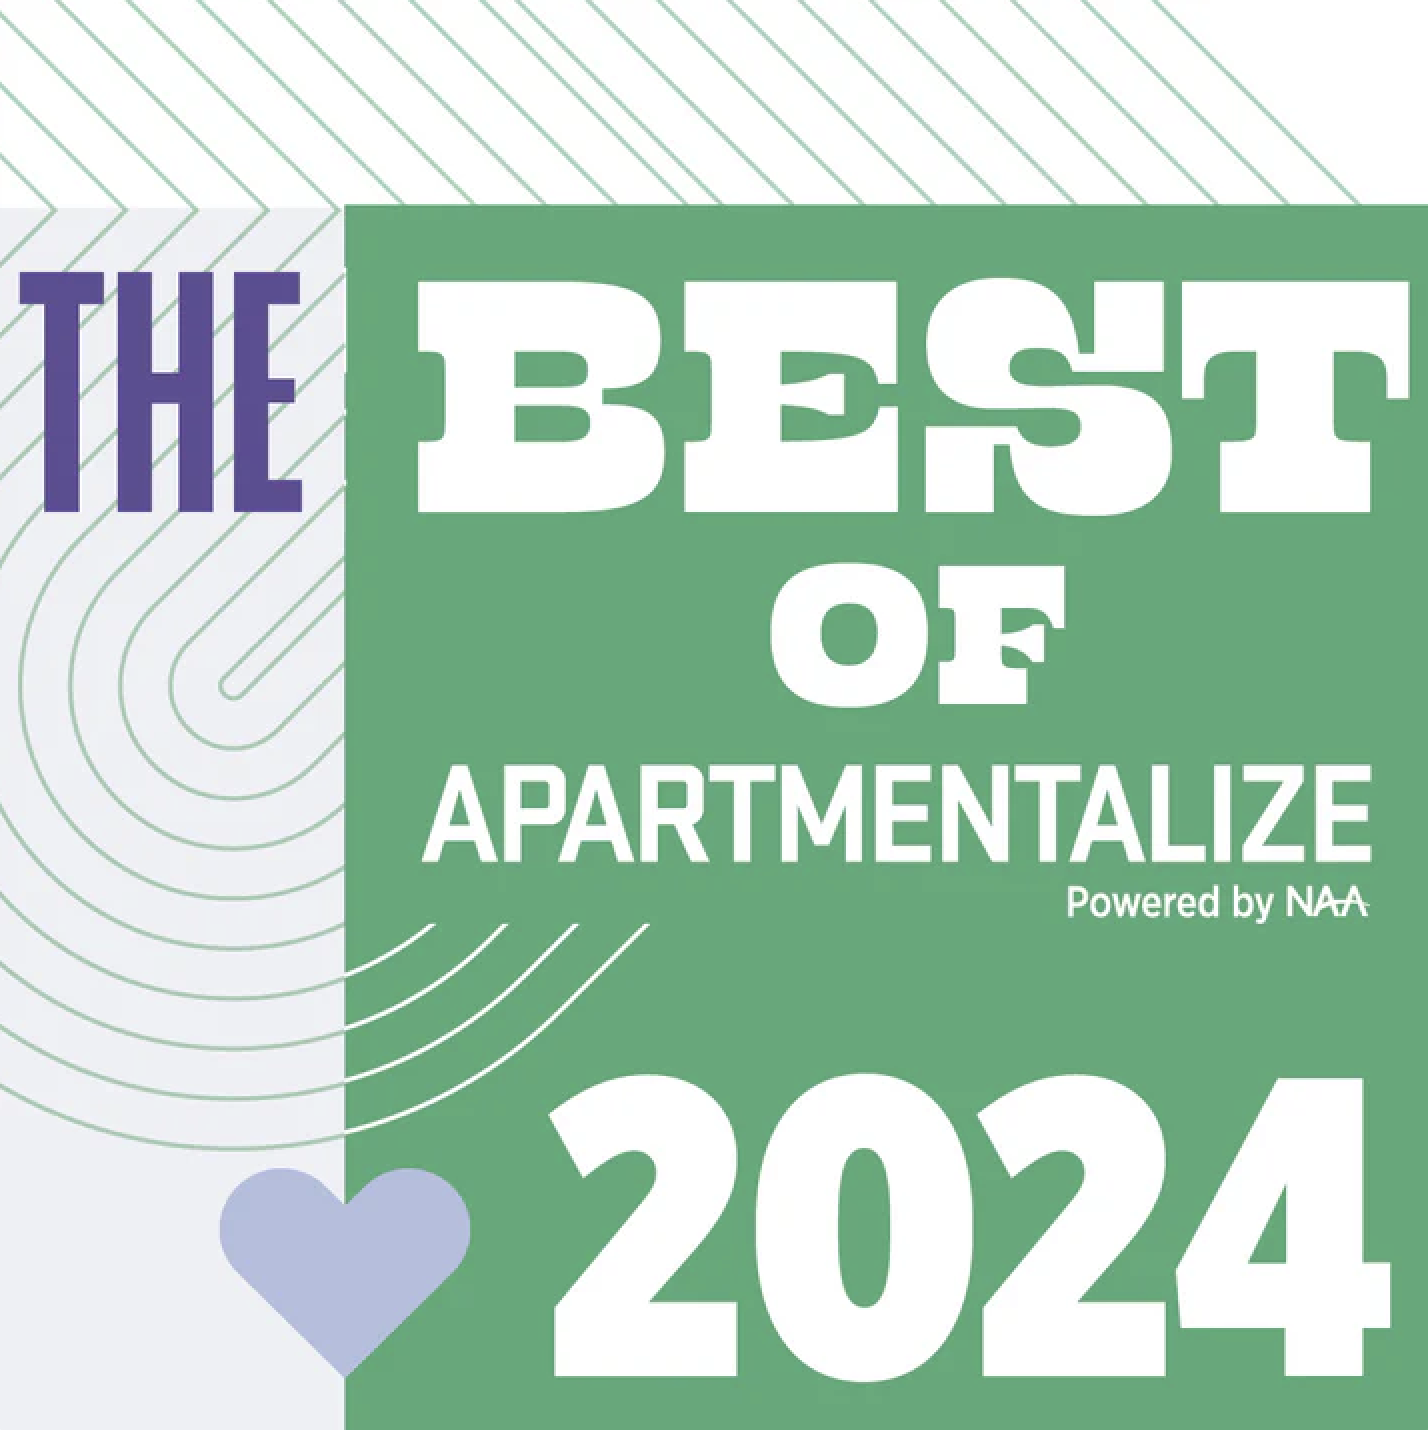 best of apartmentalize 2024 graphic